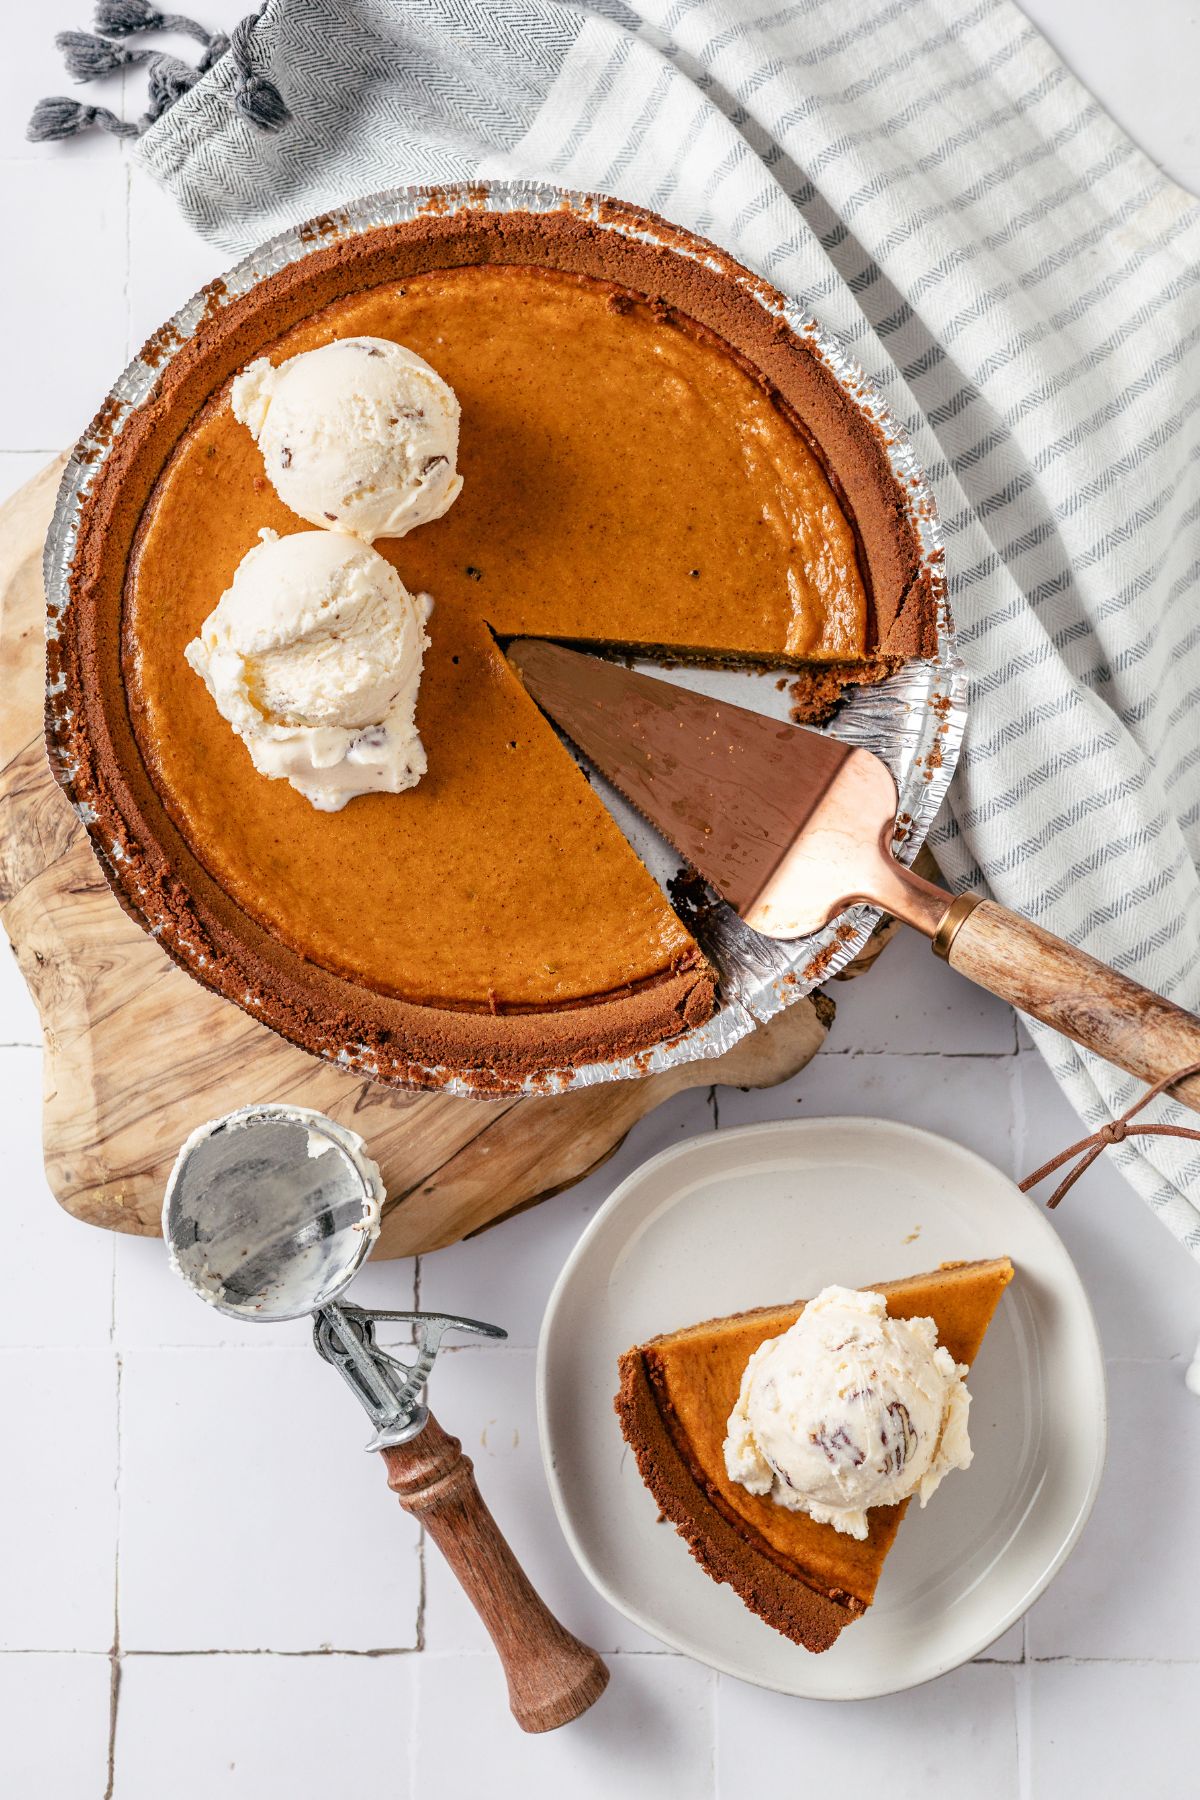 yummy Sweet Potato Pie with Graham Crust topped with ice cream